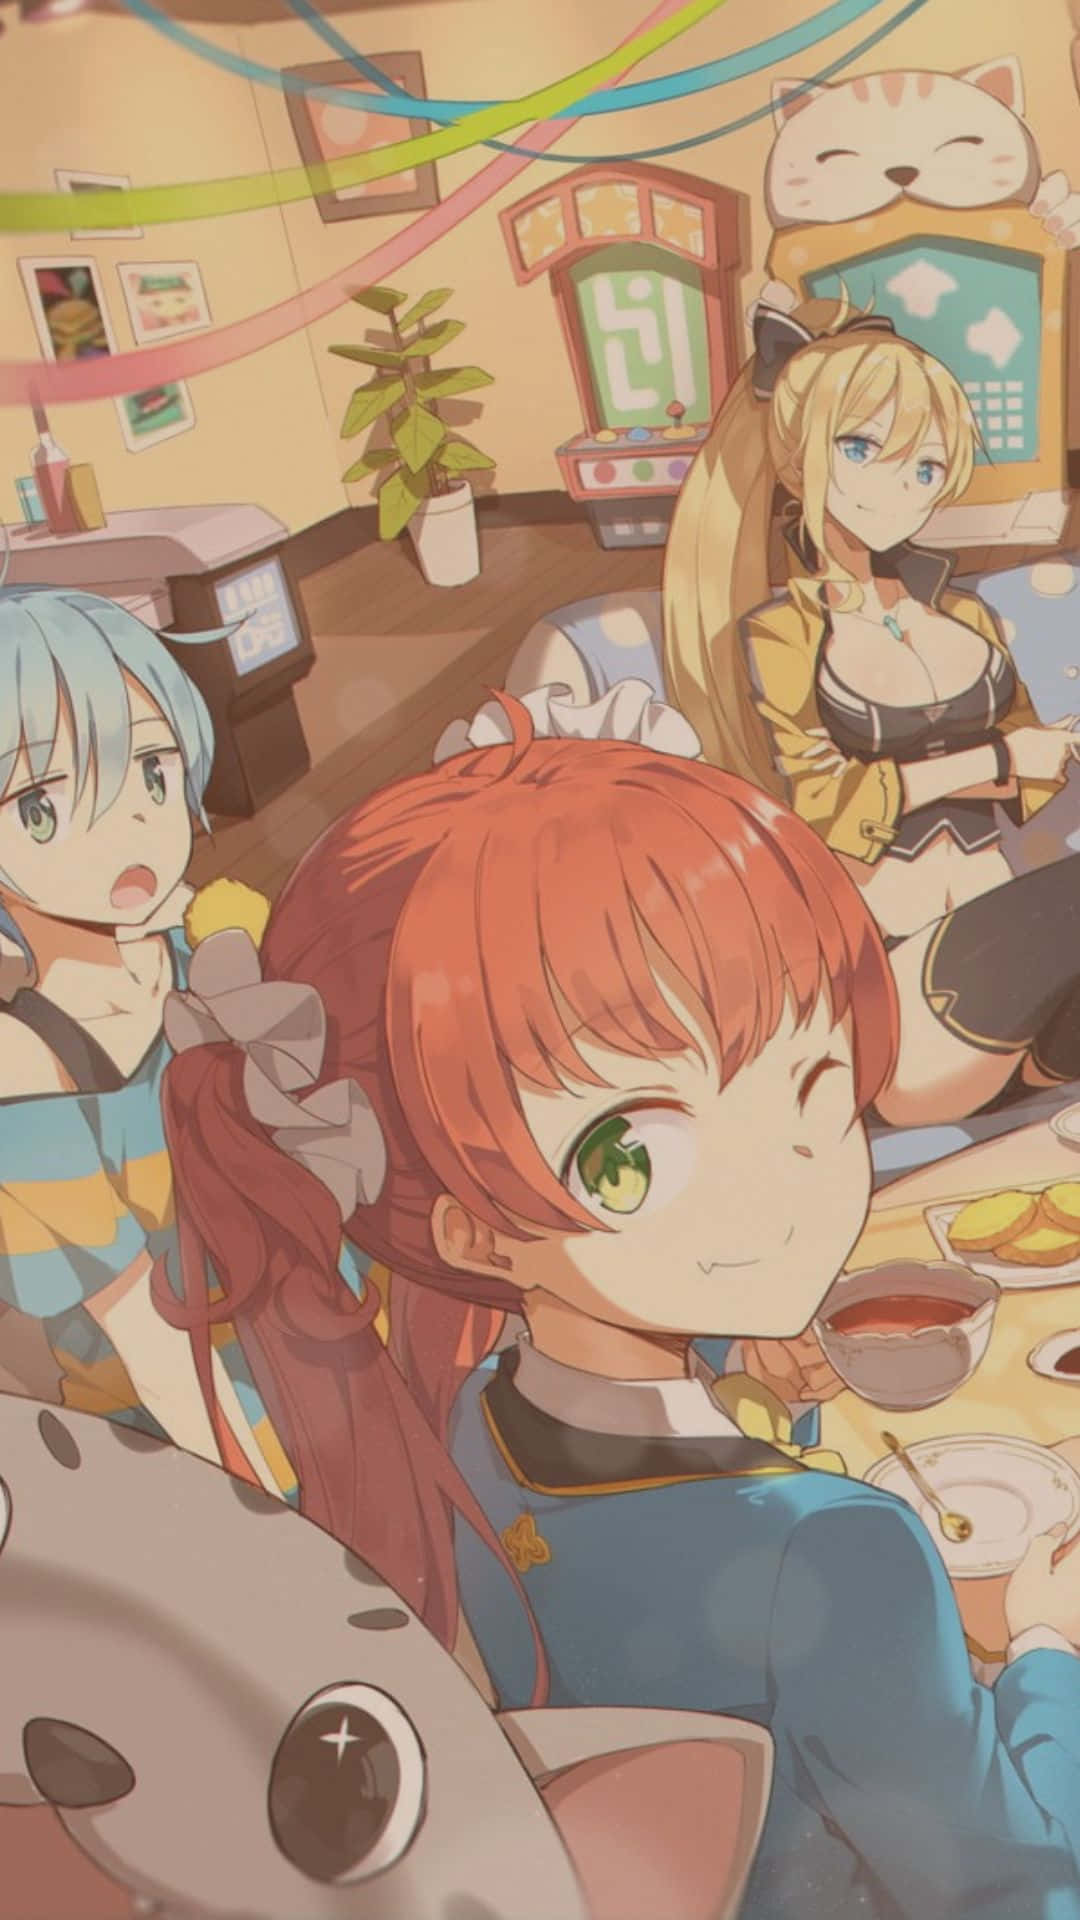 Girls Hanging Out Anime Cafe Background